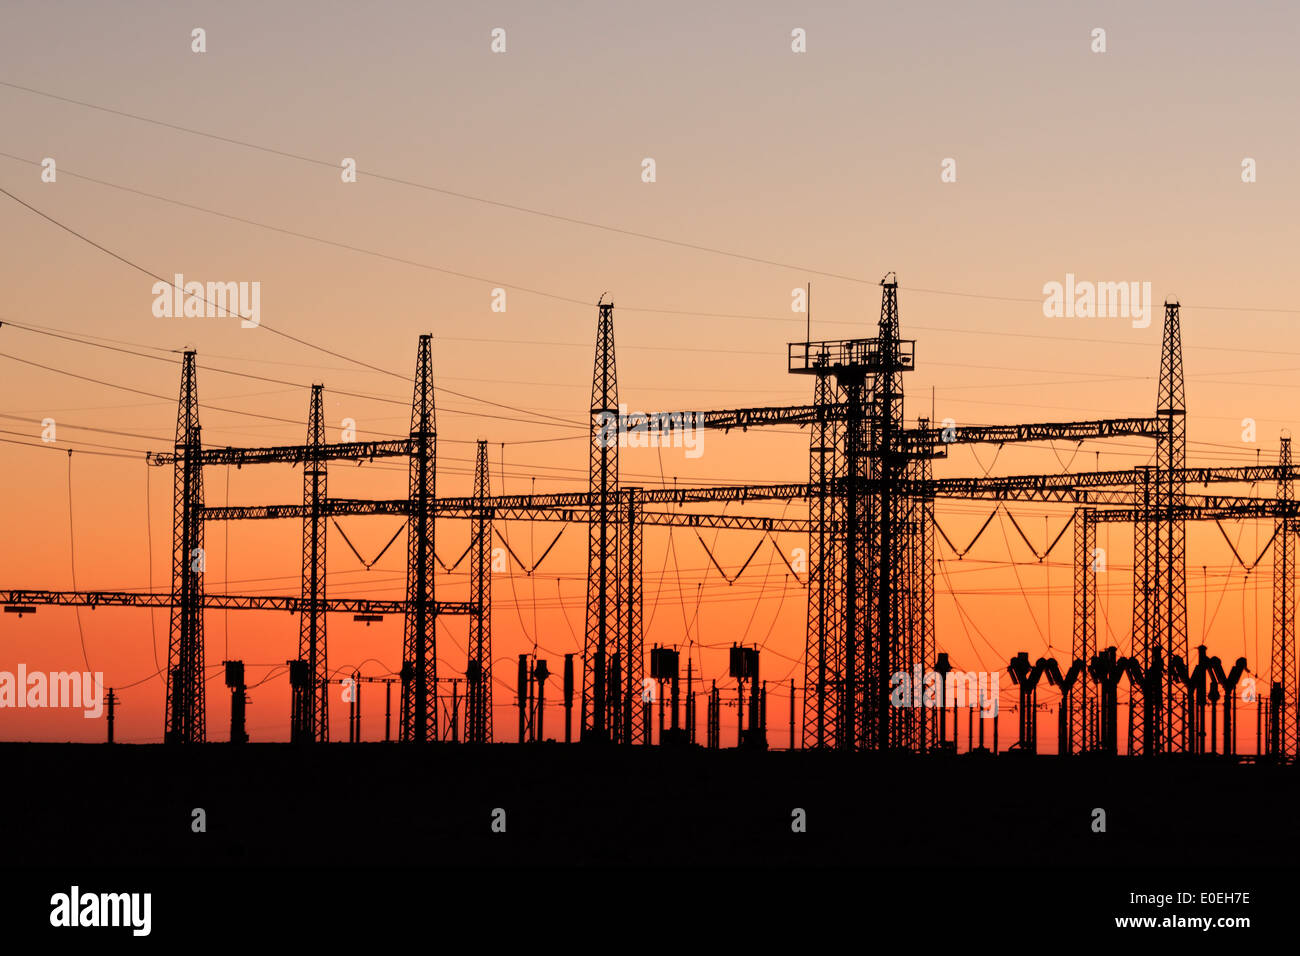 Silhouetted power pylons against a red sky at sunset Stock Photo